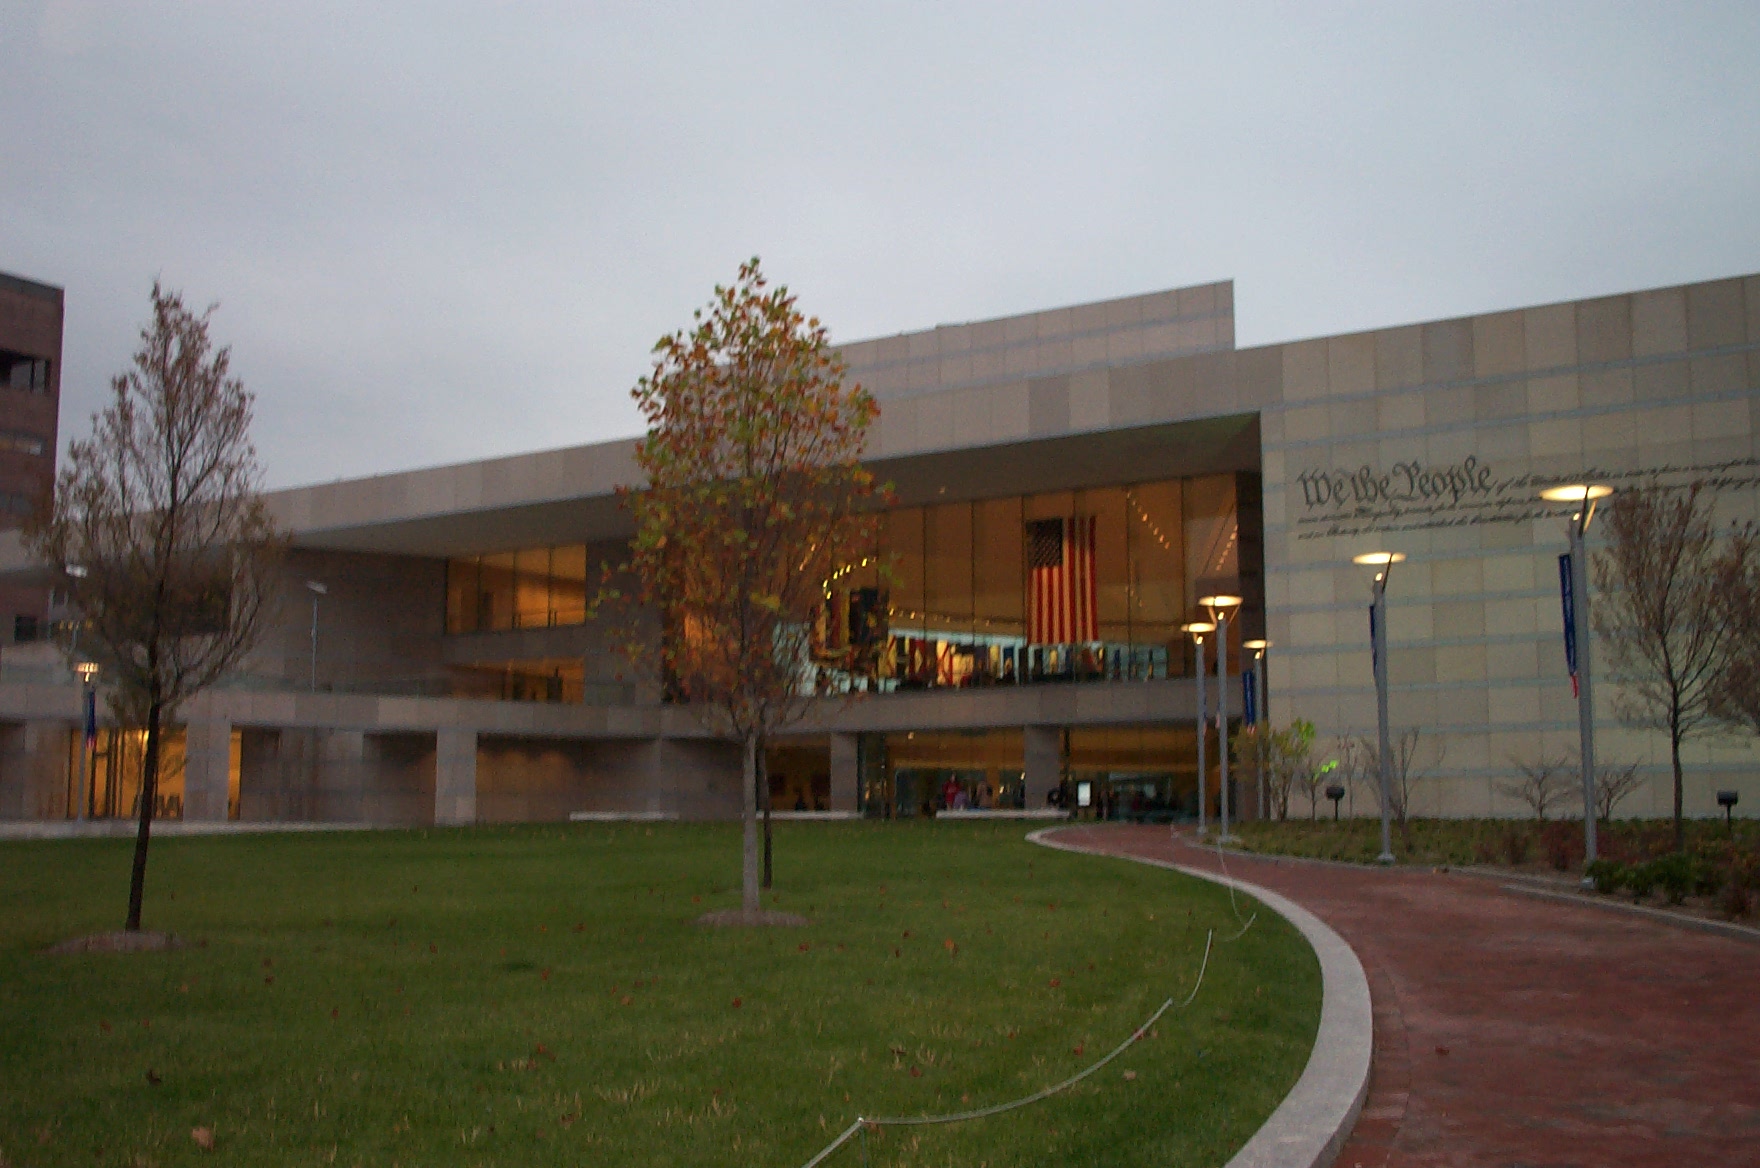 The National Constitution Center